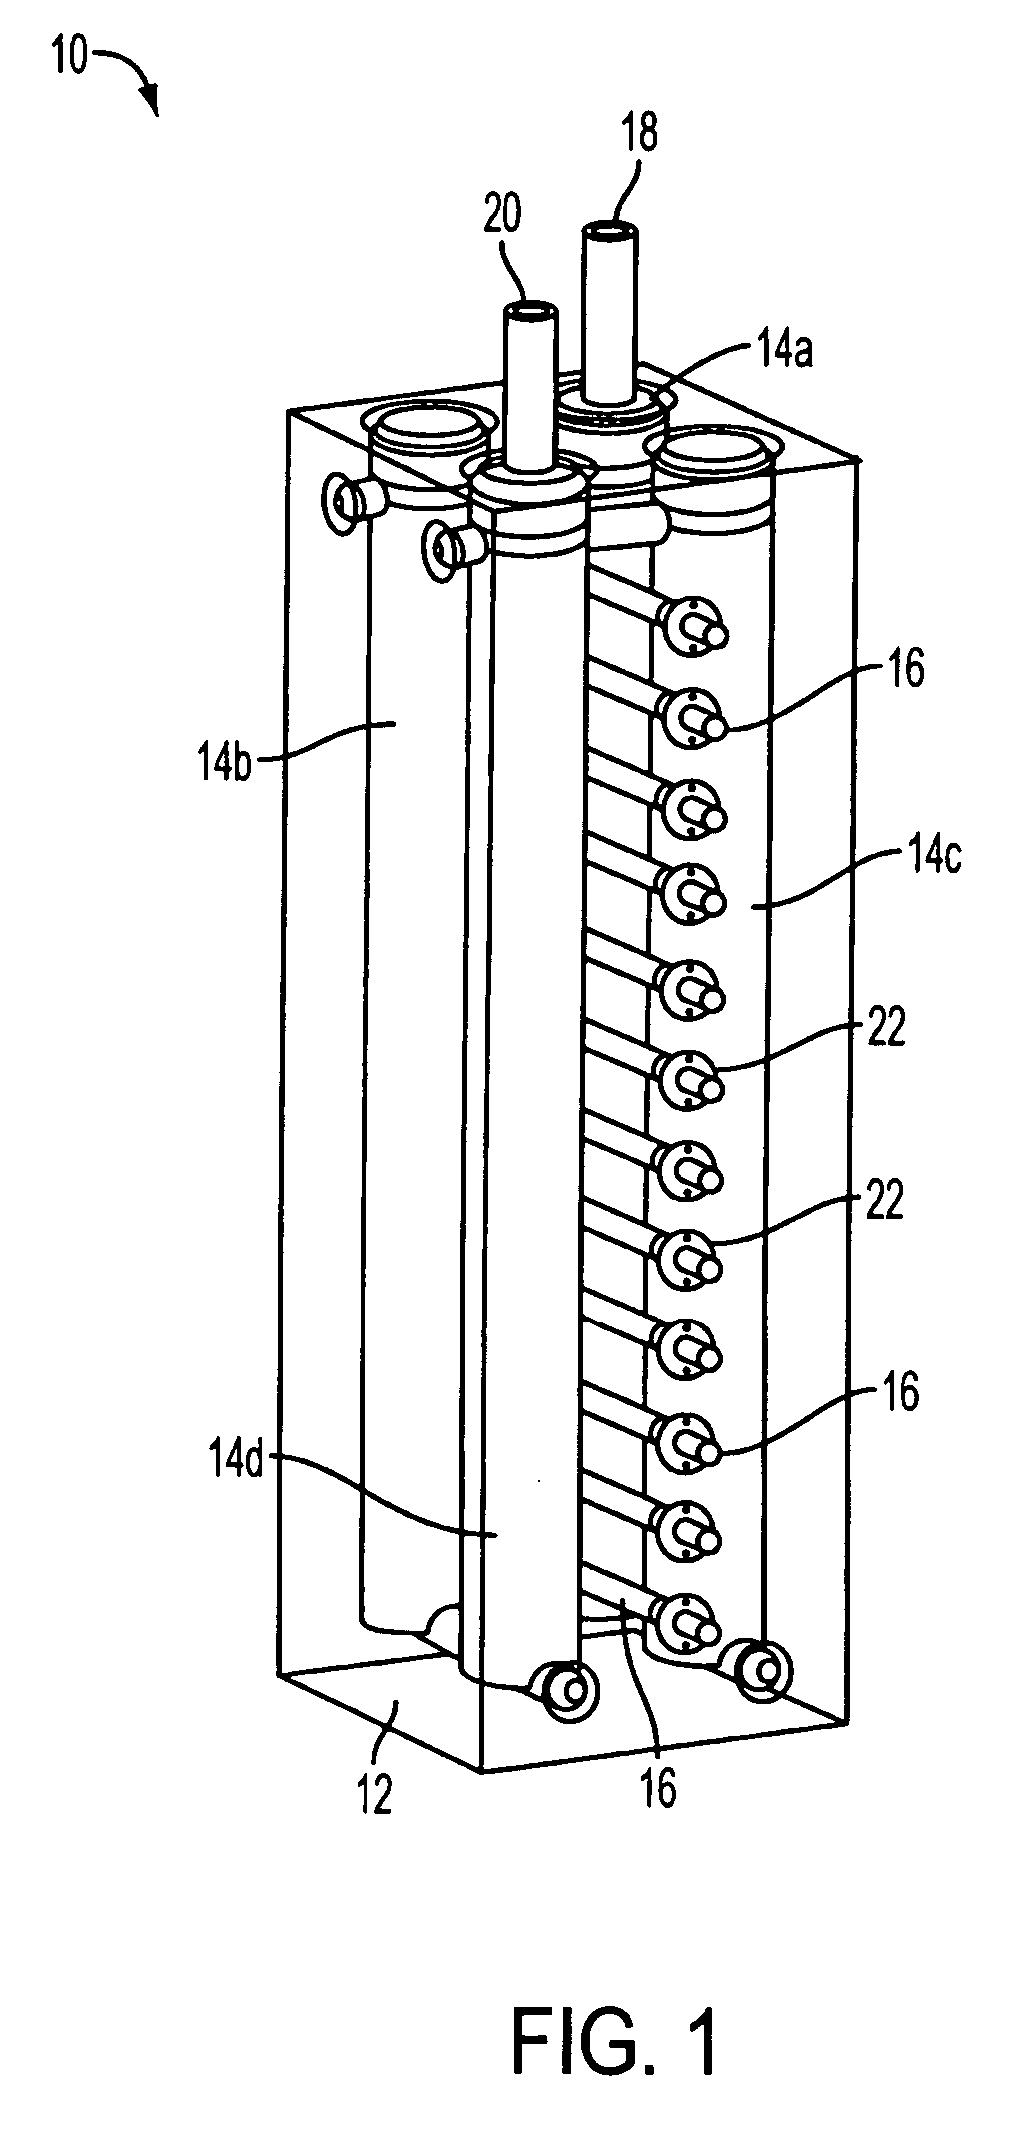 Methods and systems for heating thermal storage units